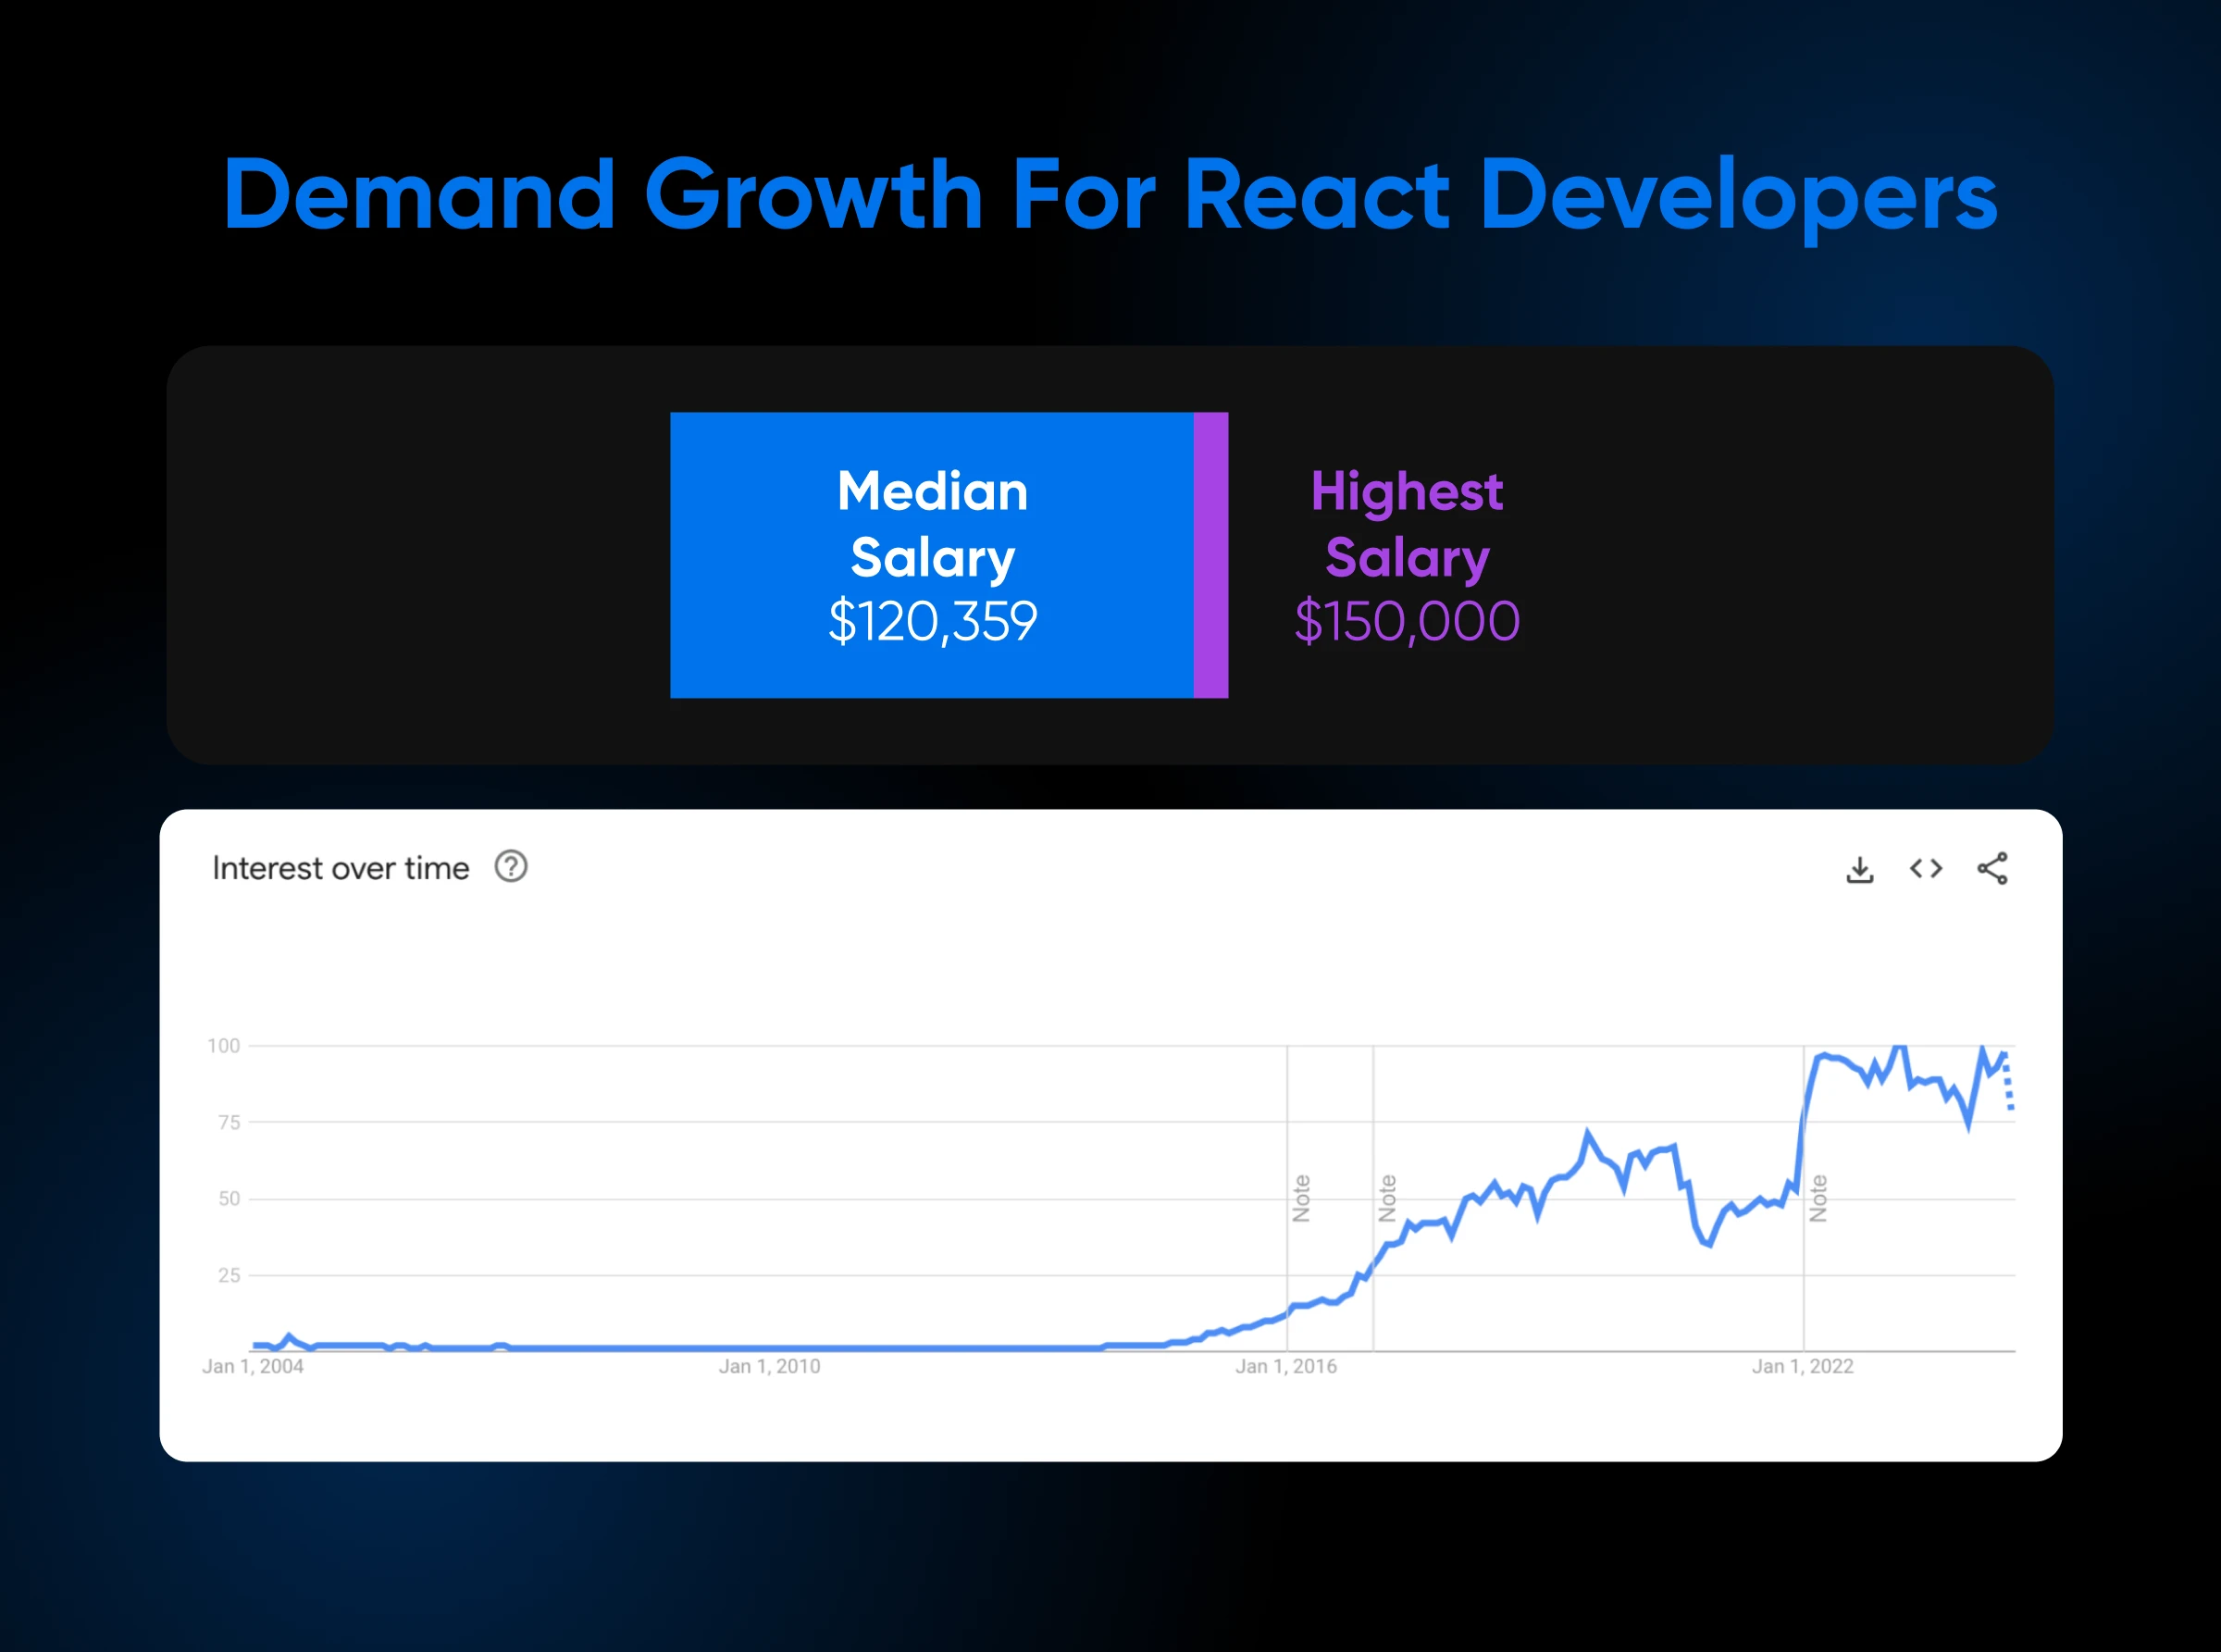 Demand growth for React developers from 2004 to 2022 appears on a graph, along with median and highest salary